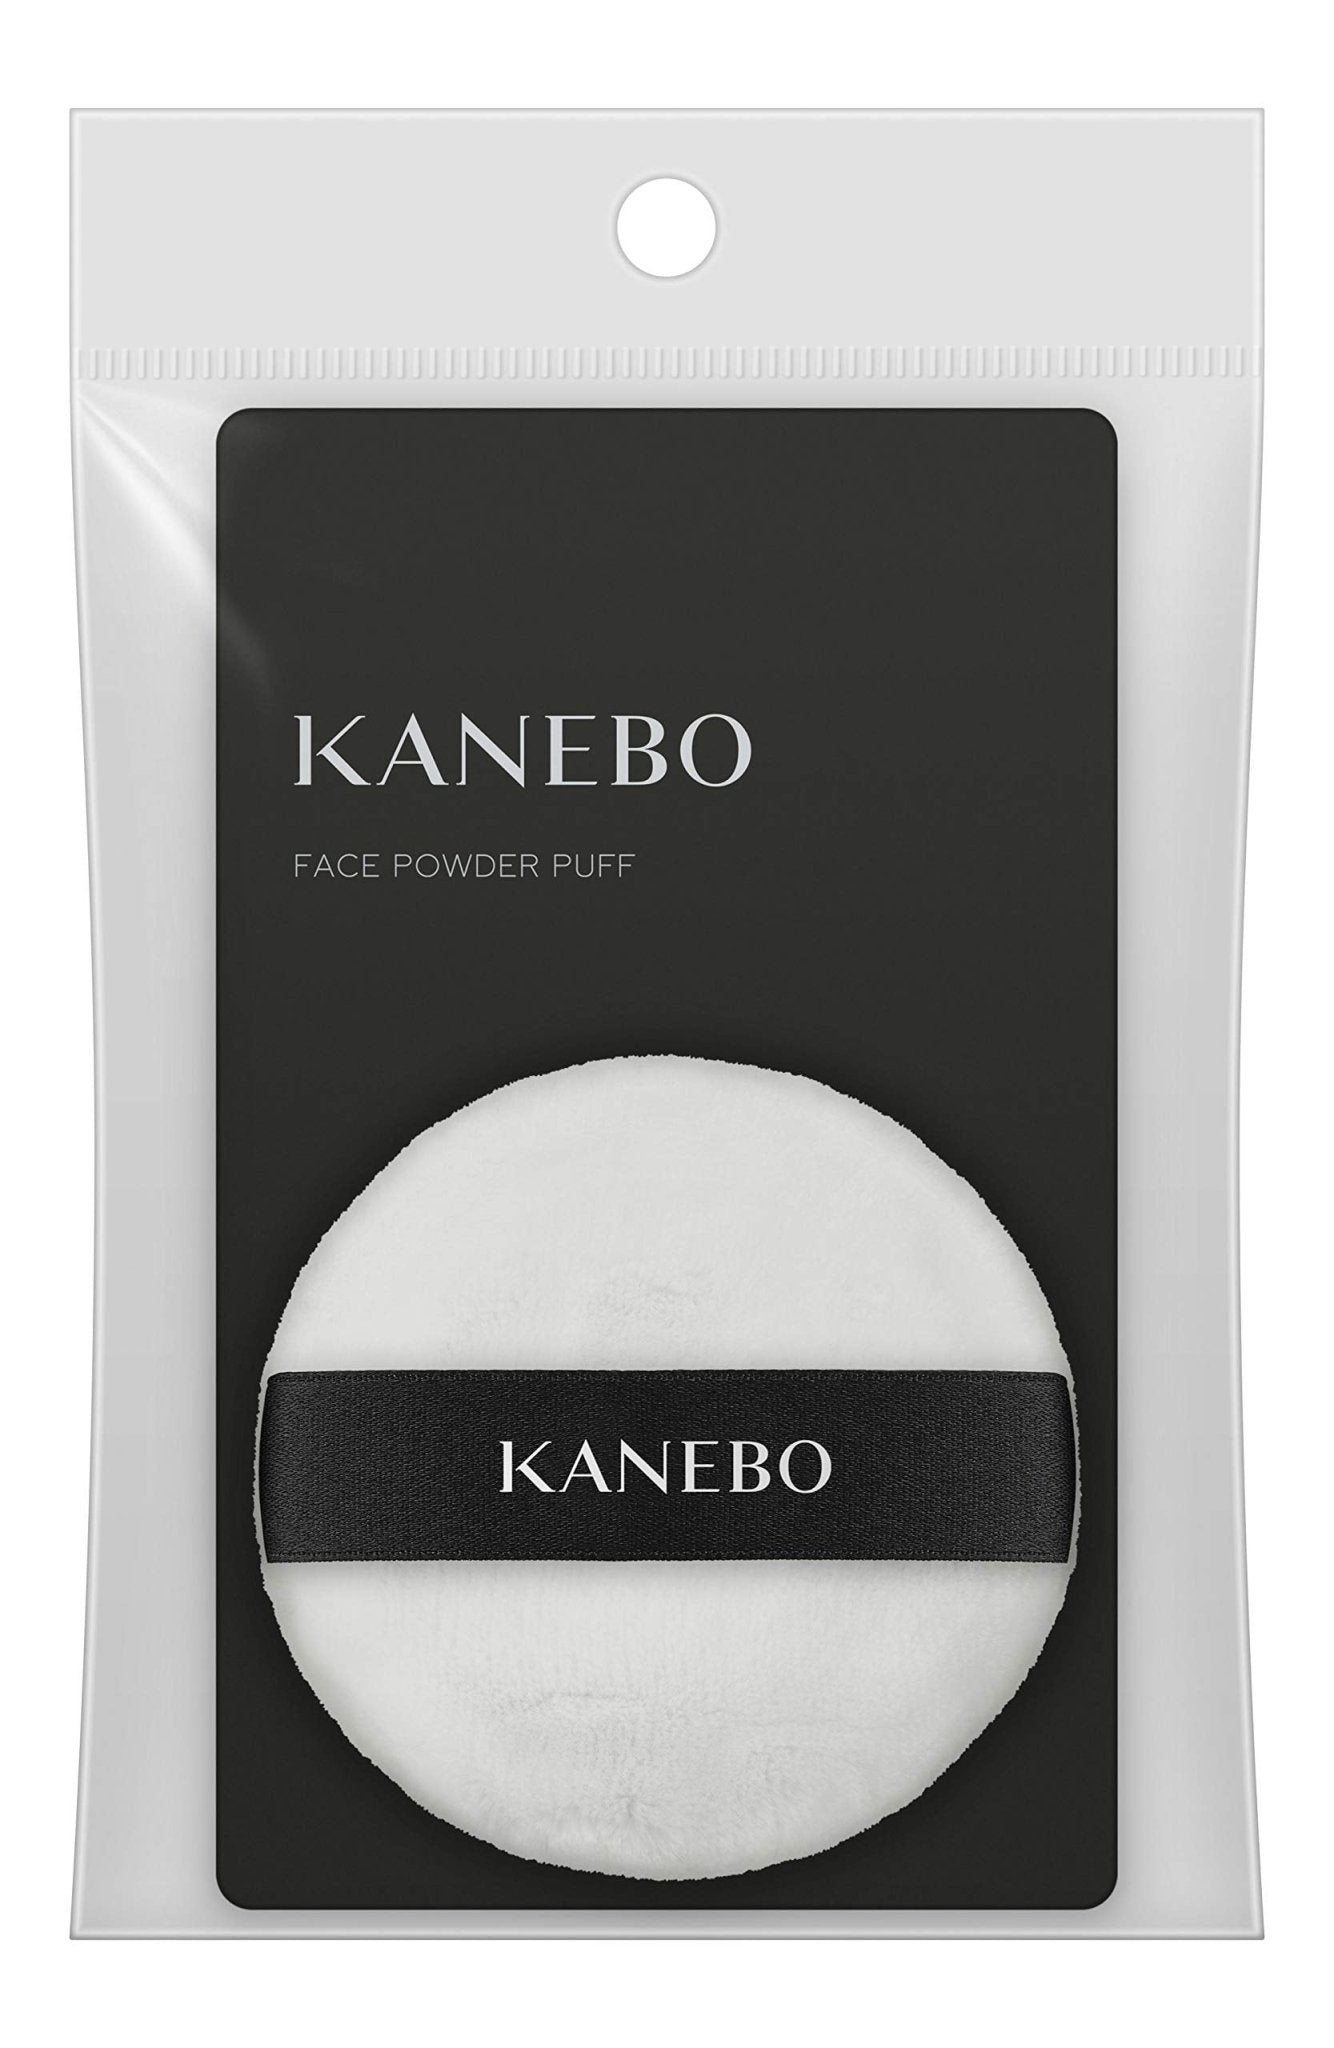 Kanebo High - Quality Face Powder Puff 1 Piece - Sustainable Beauty Tools